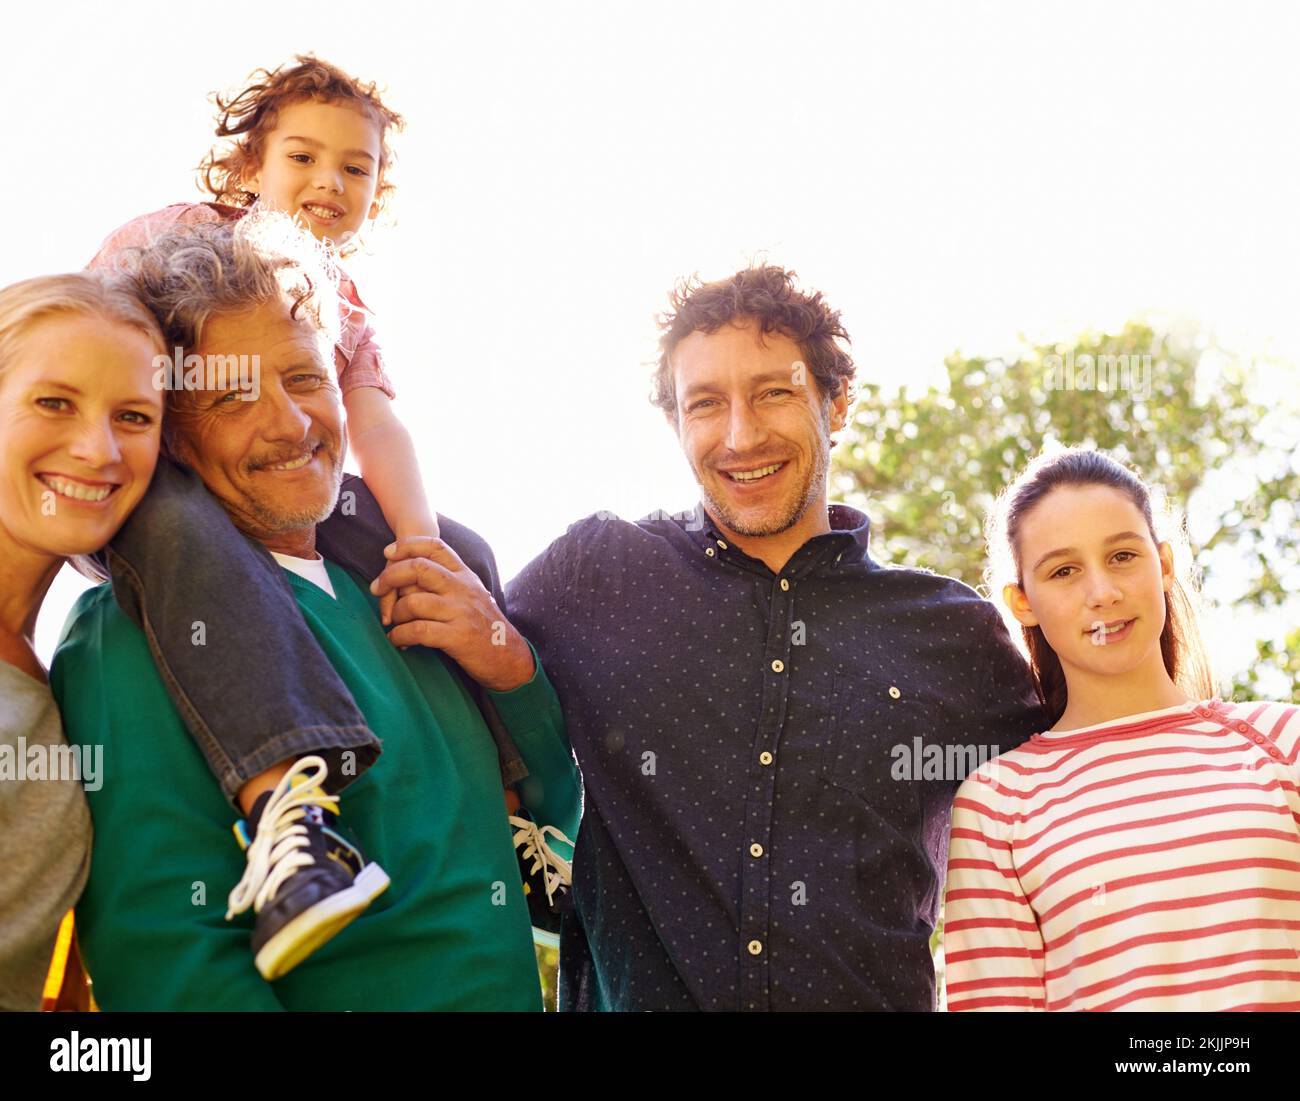 Three generations coming together. Portrait of a family standing outdoors in the sun. Stock Photo